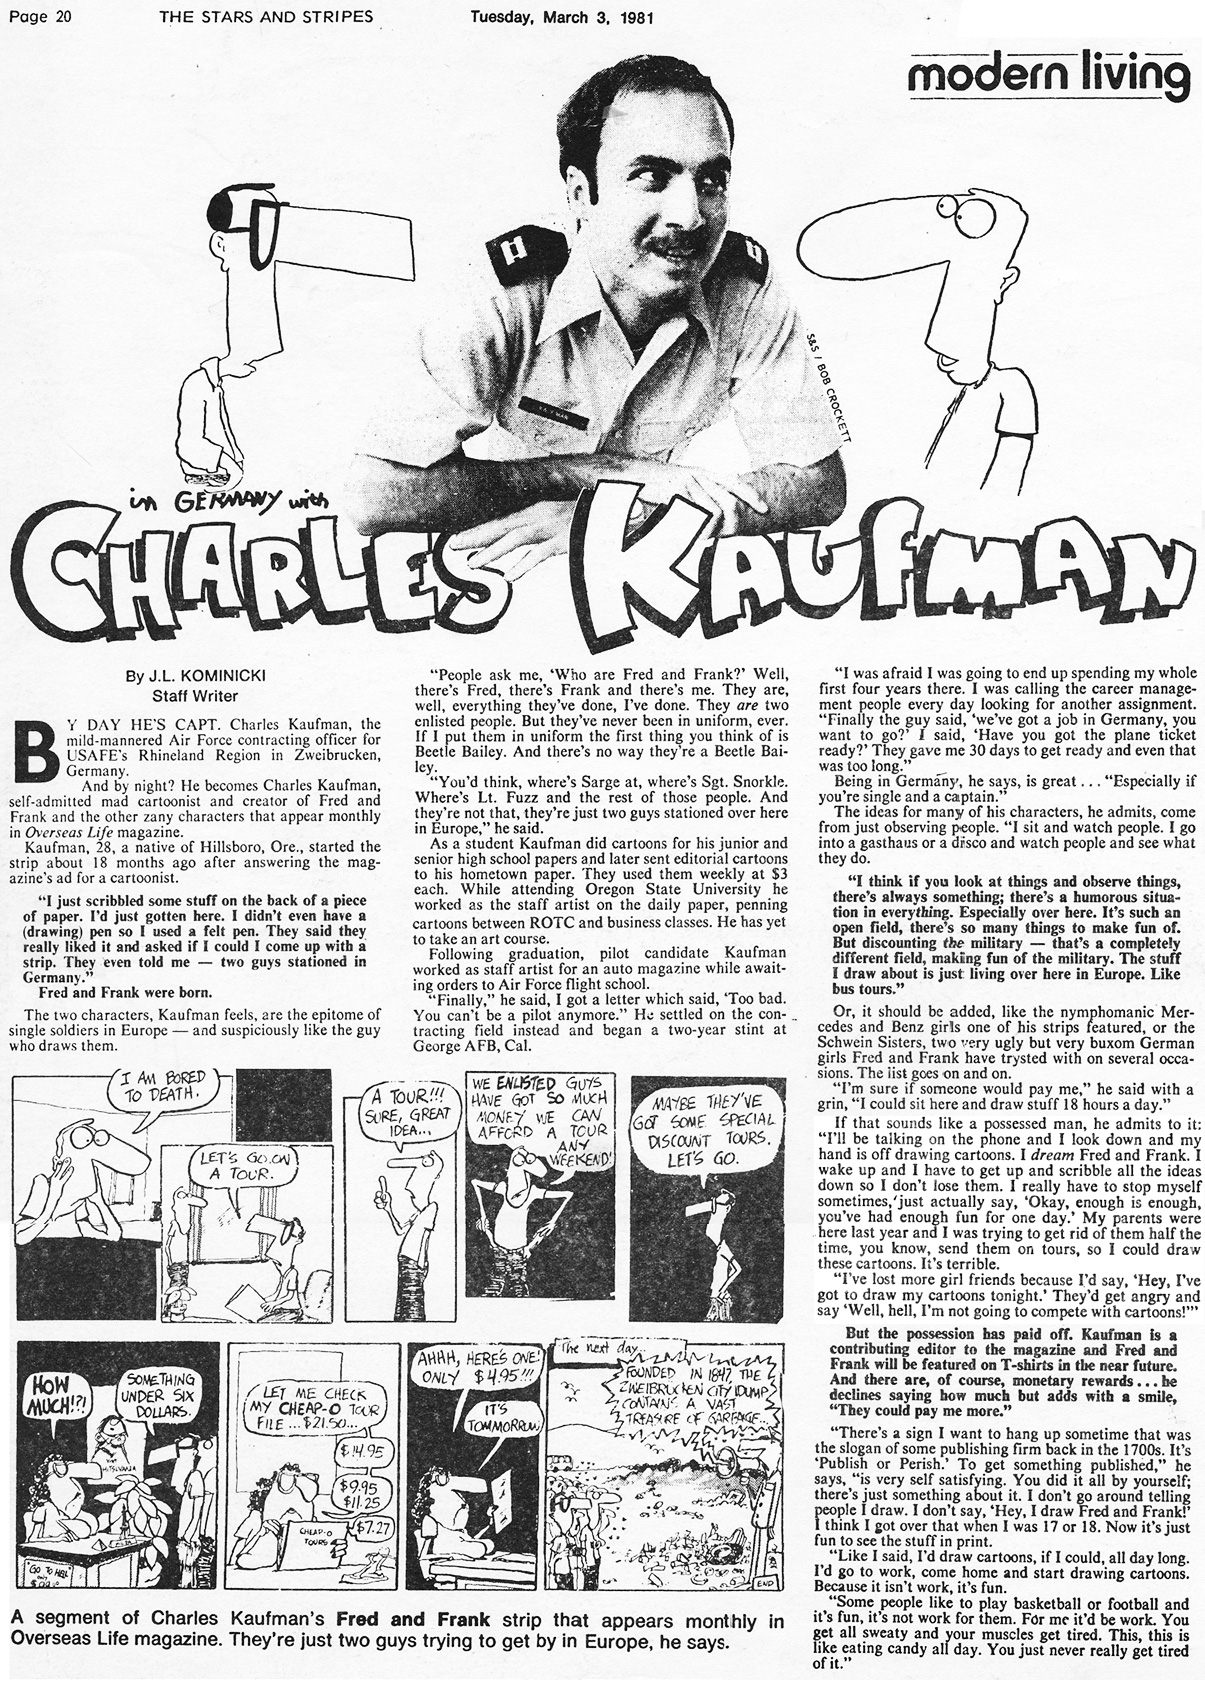 Charles Kaufman's Fred and Frank Comics - Stars & Stripes Article March 3, 1981